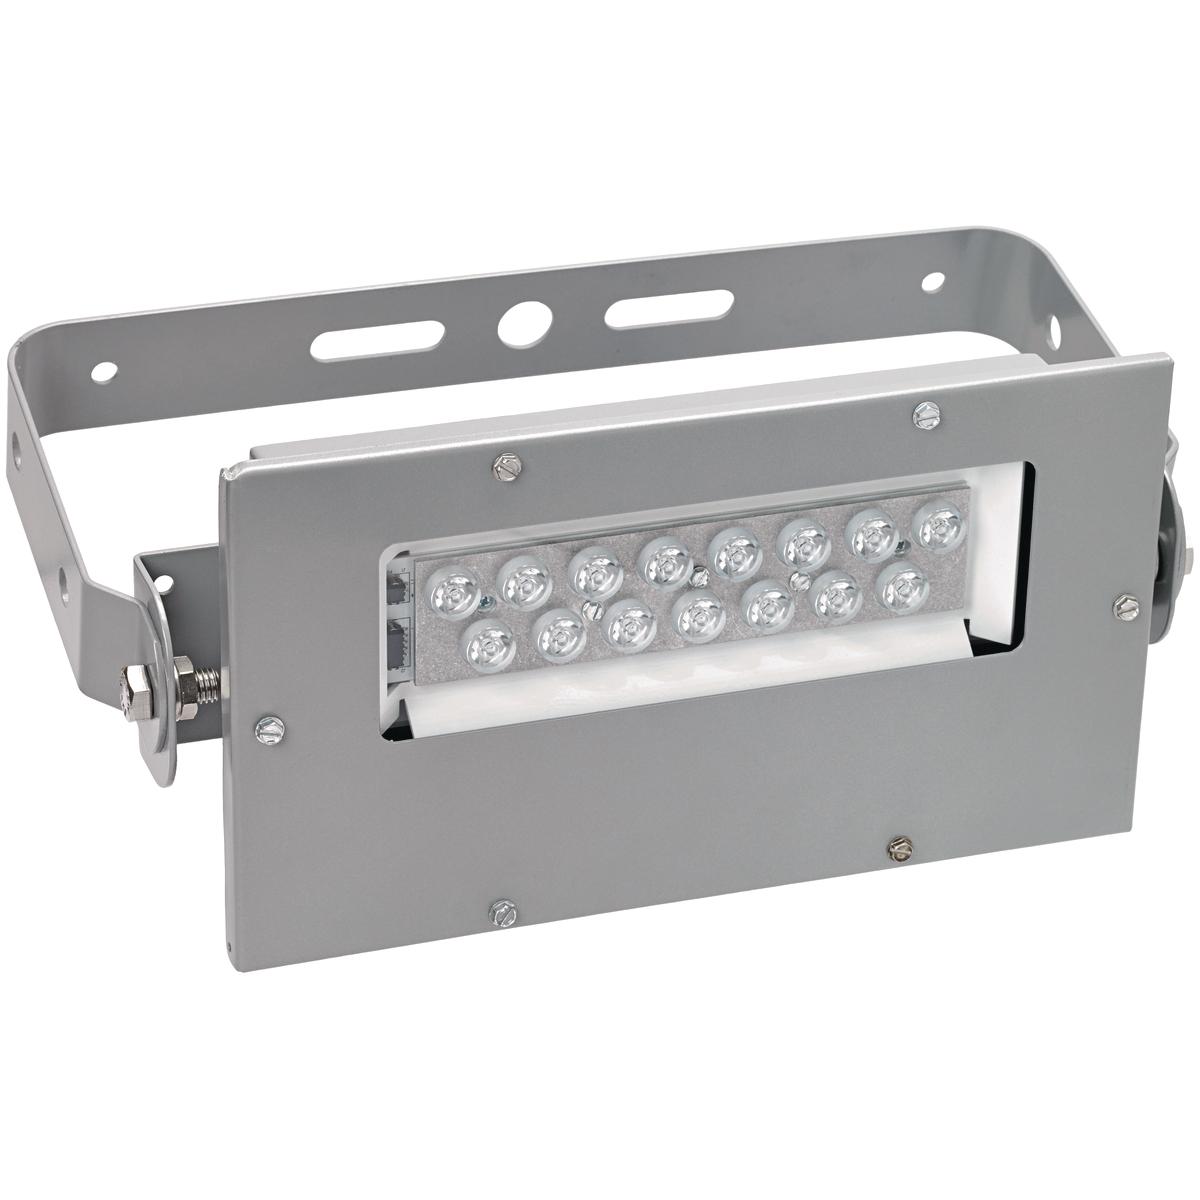 Hubbell KFLC2330 The KFLC Series compact LED floodlights are designed with a copper-free aluminum housing and painted with a powder epoxy finish for superior corrosion resistance in harsh and hazardous environments. Killark LED floodlights provide a crisp white light that